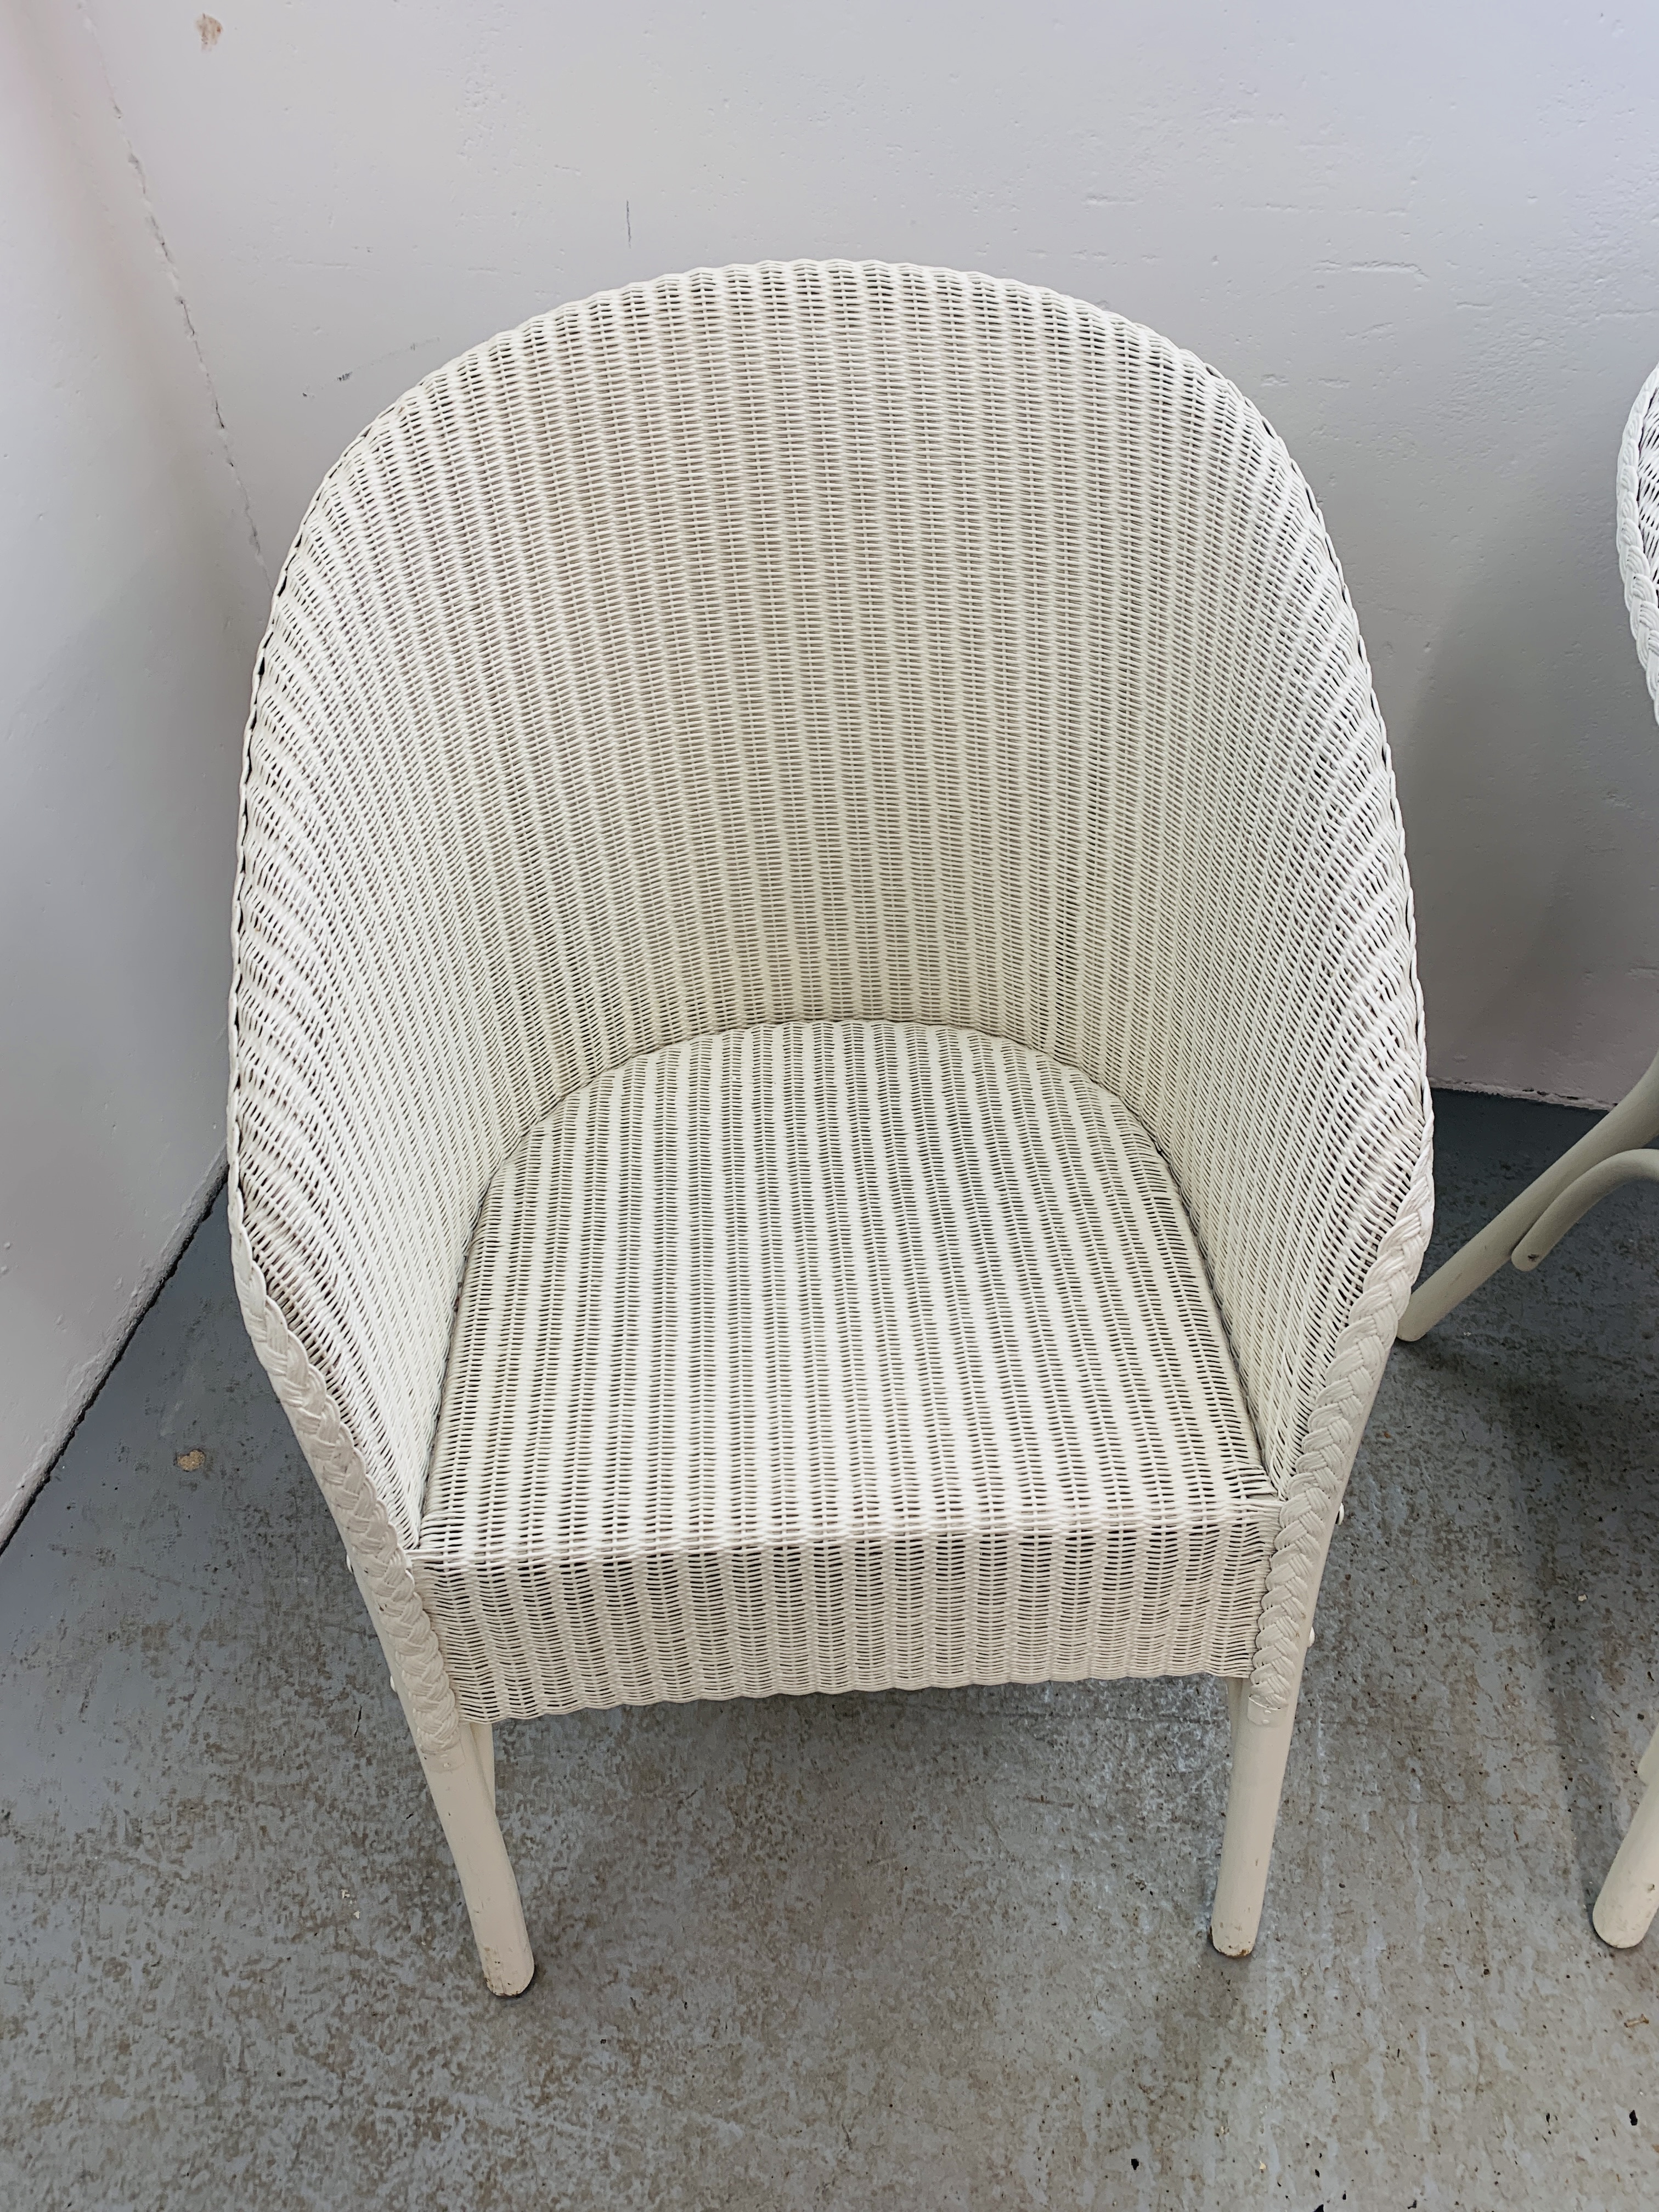 A PAIR OF LLOYD LOOM WHITE FINISH CHAIRS - Image 6 of 6